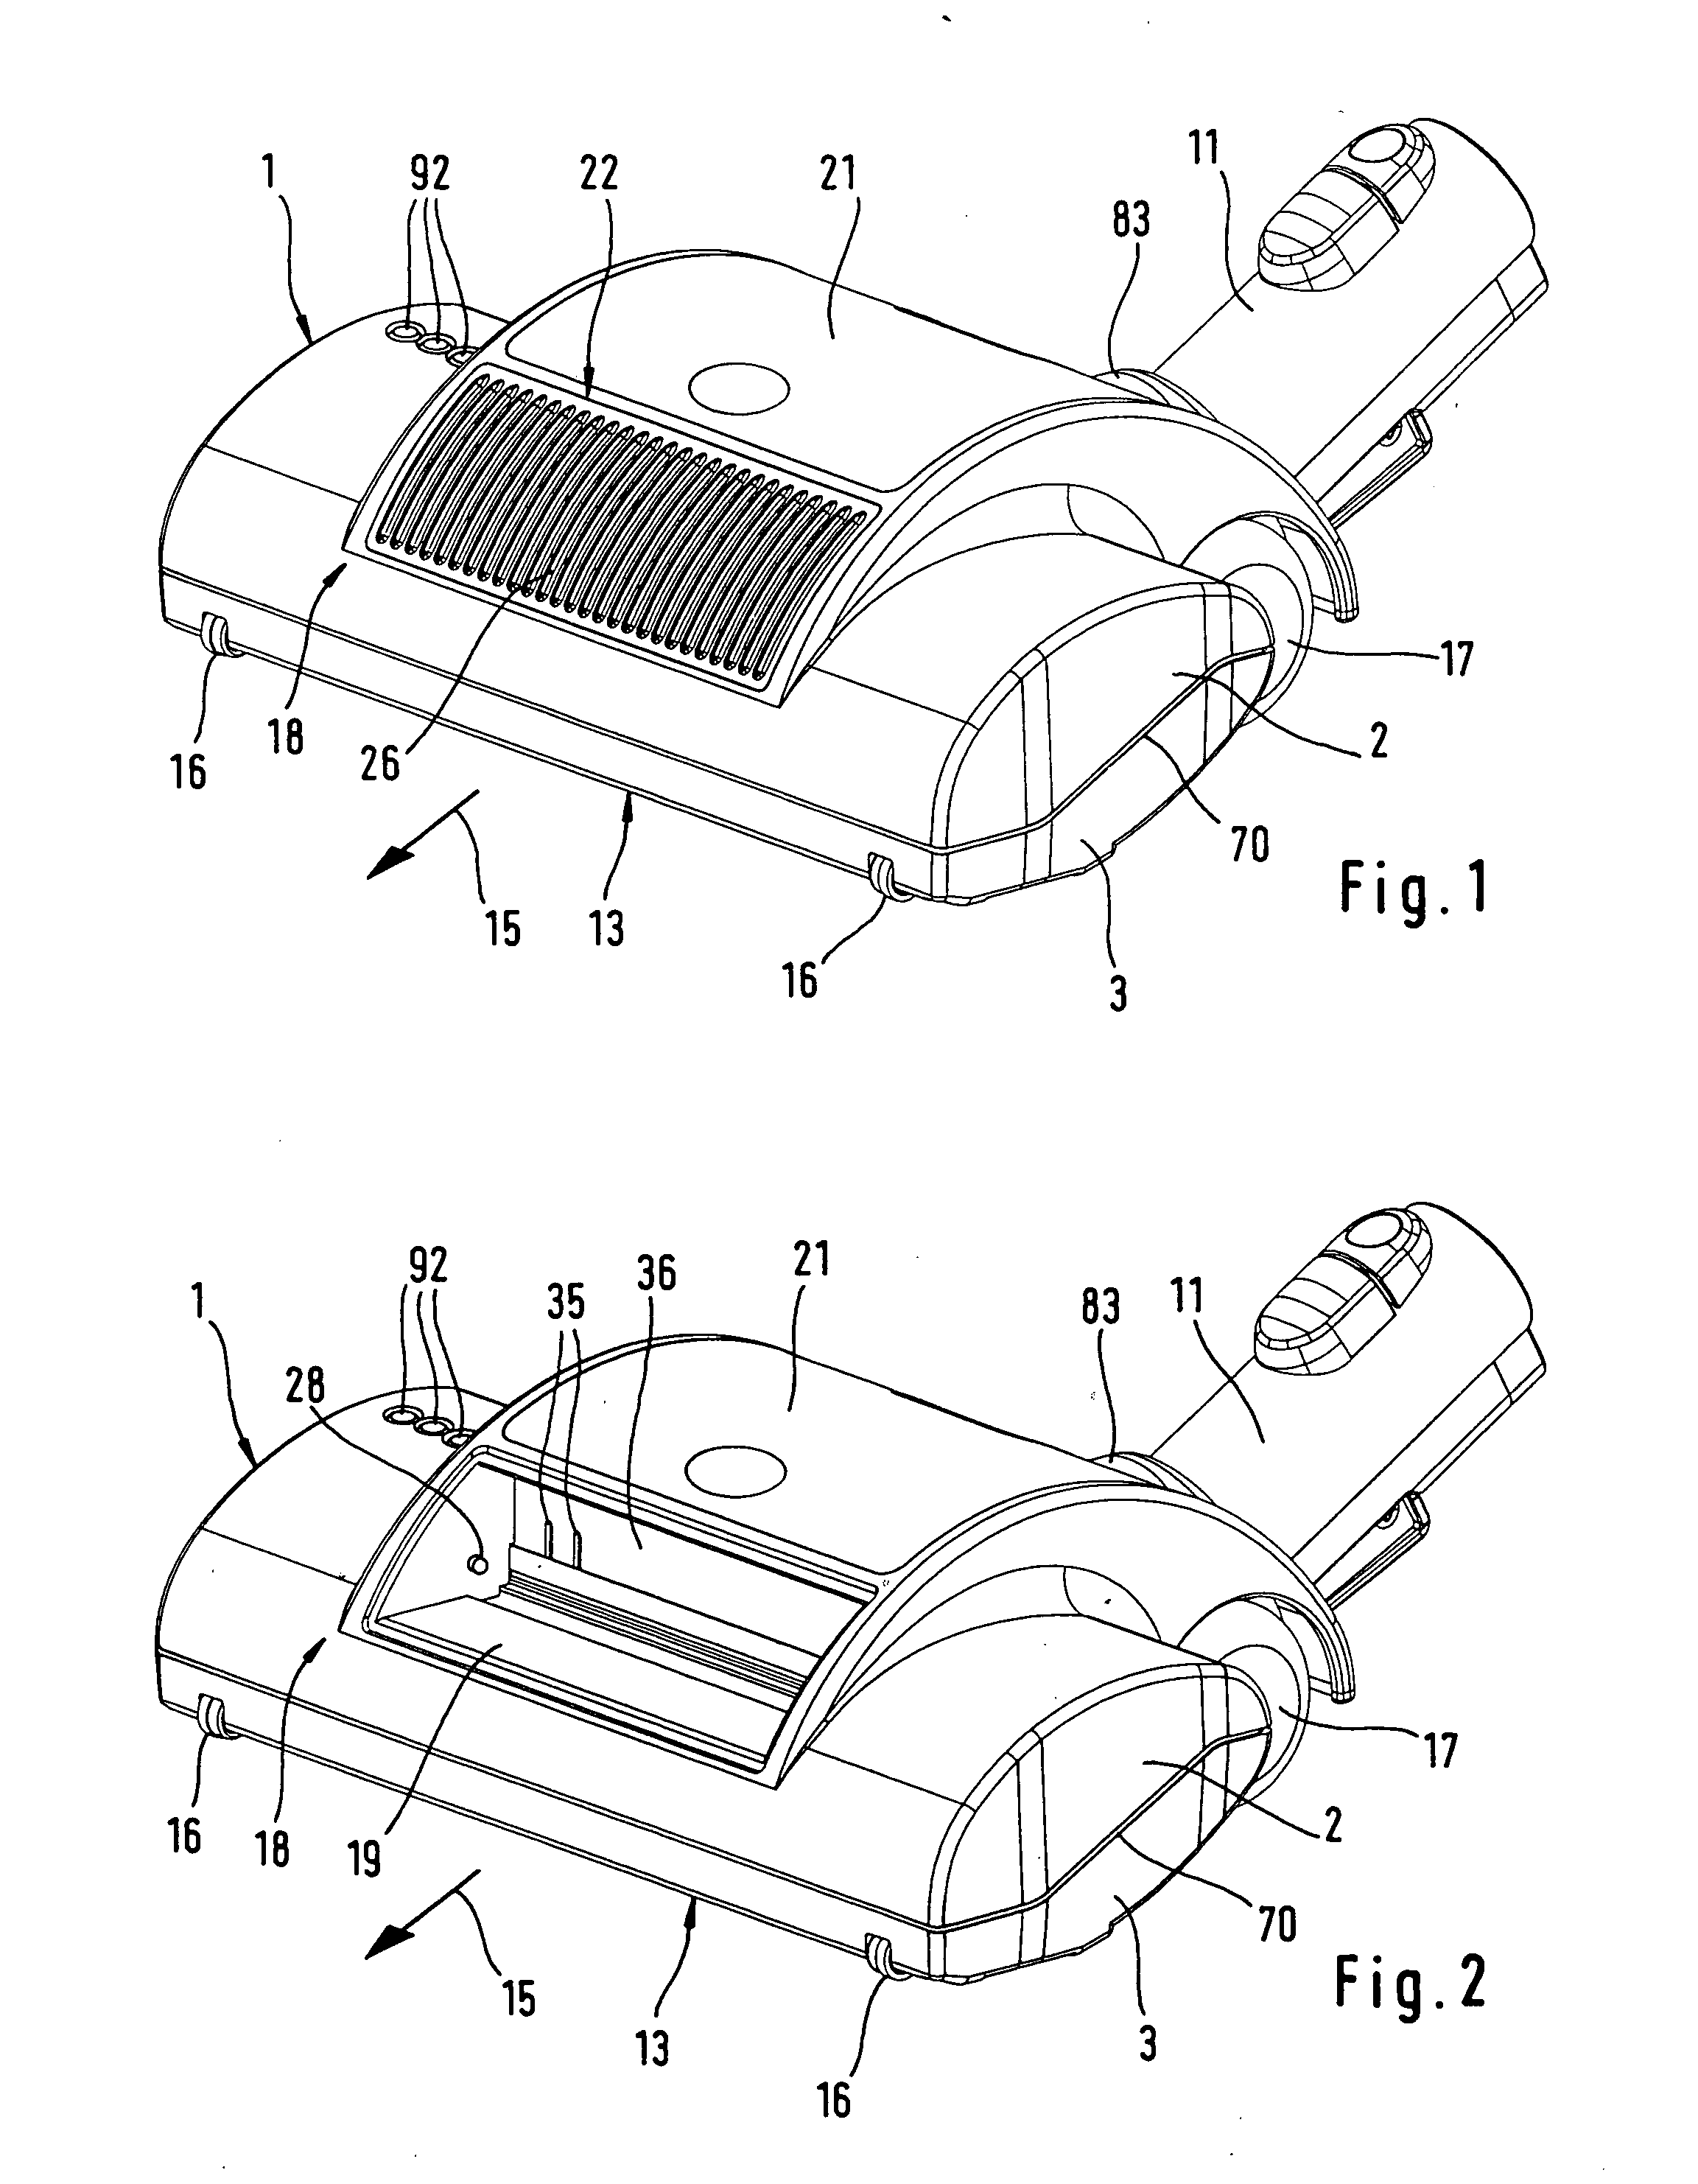 Cleaning Tool for Floor Surfaces Having an Illumination Element for a Working Area